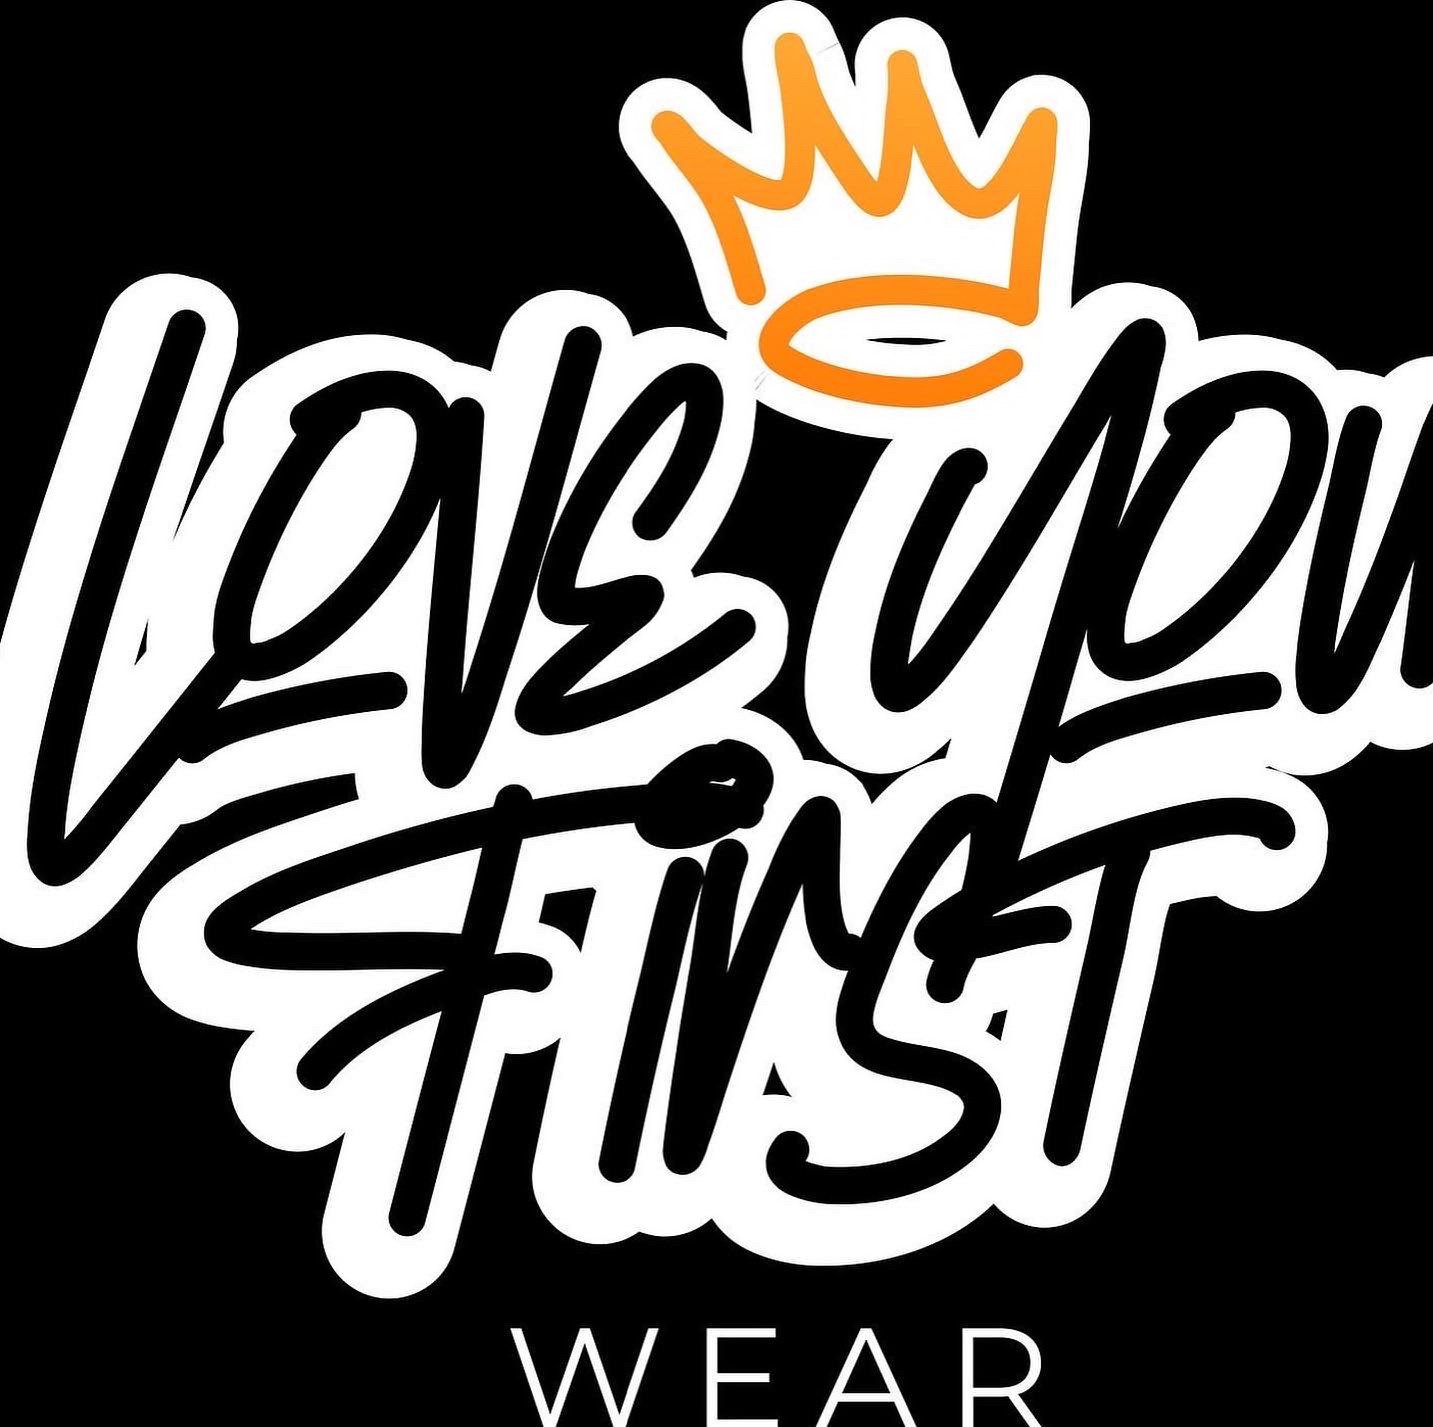  LOVE YOU FIRST WEAR